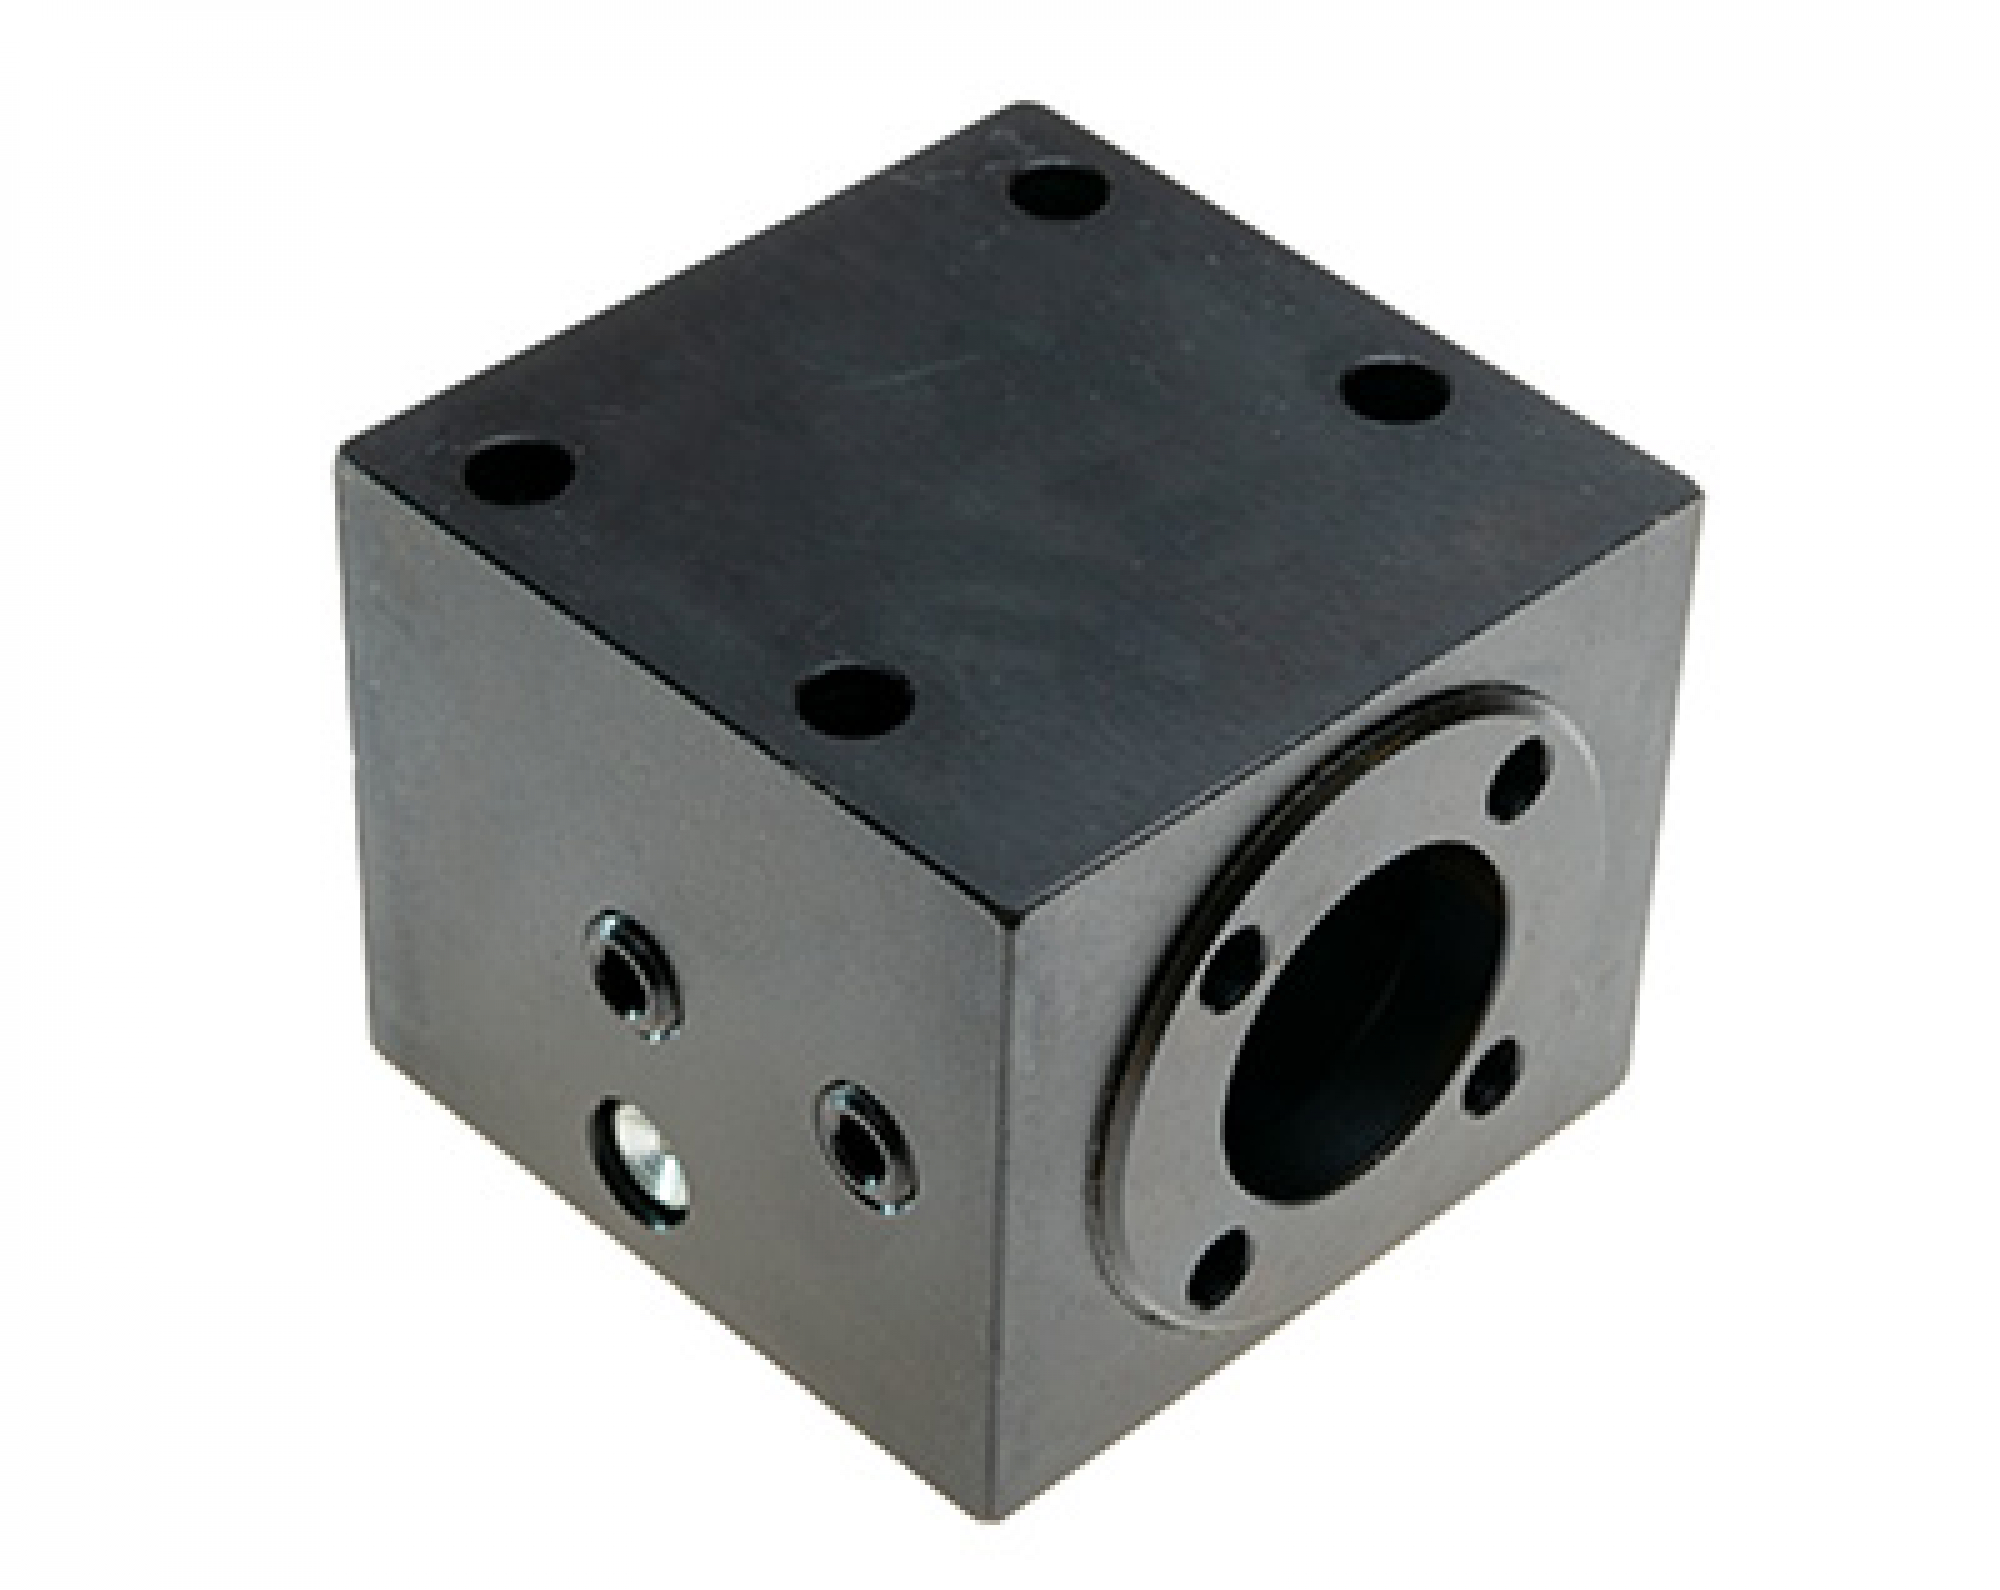 Clamping block as block for 25 mm spindle with 10mm step